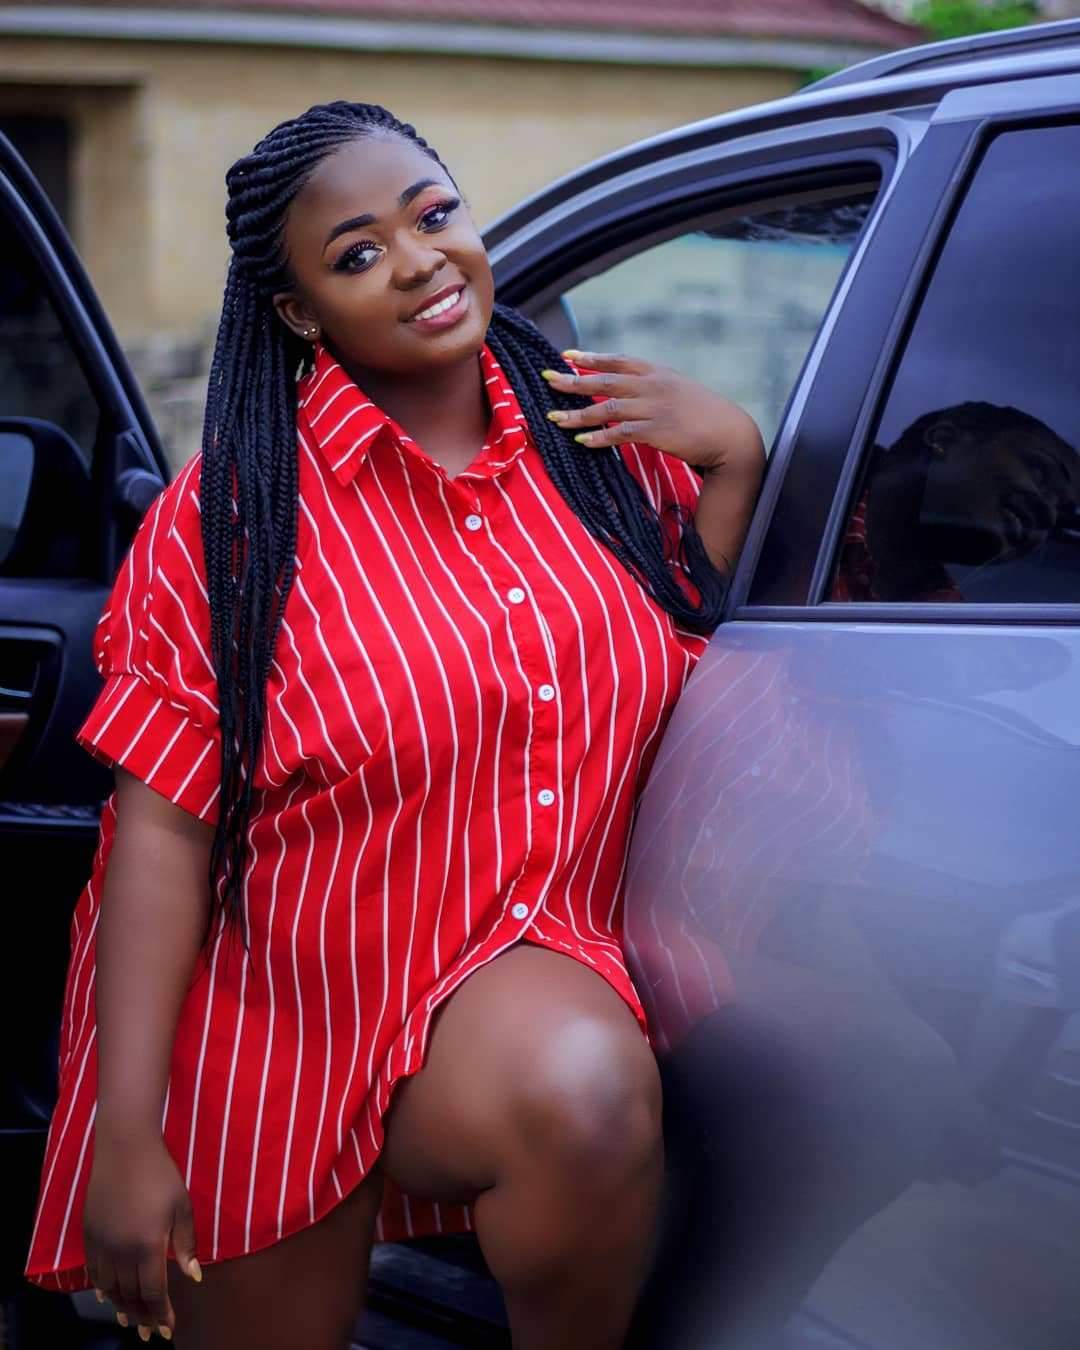 "I have great respect for roadside prostitutes" - Ghanaian actress Tracey Boakye